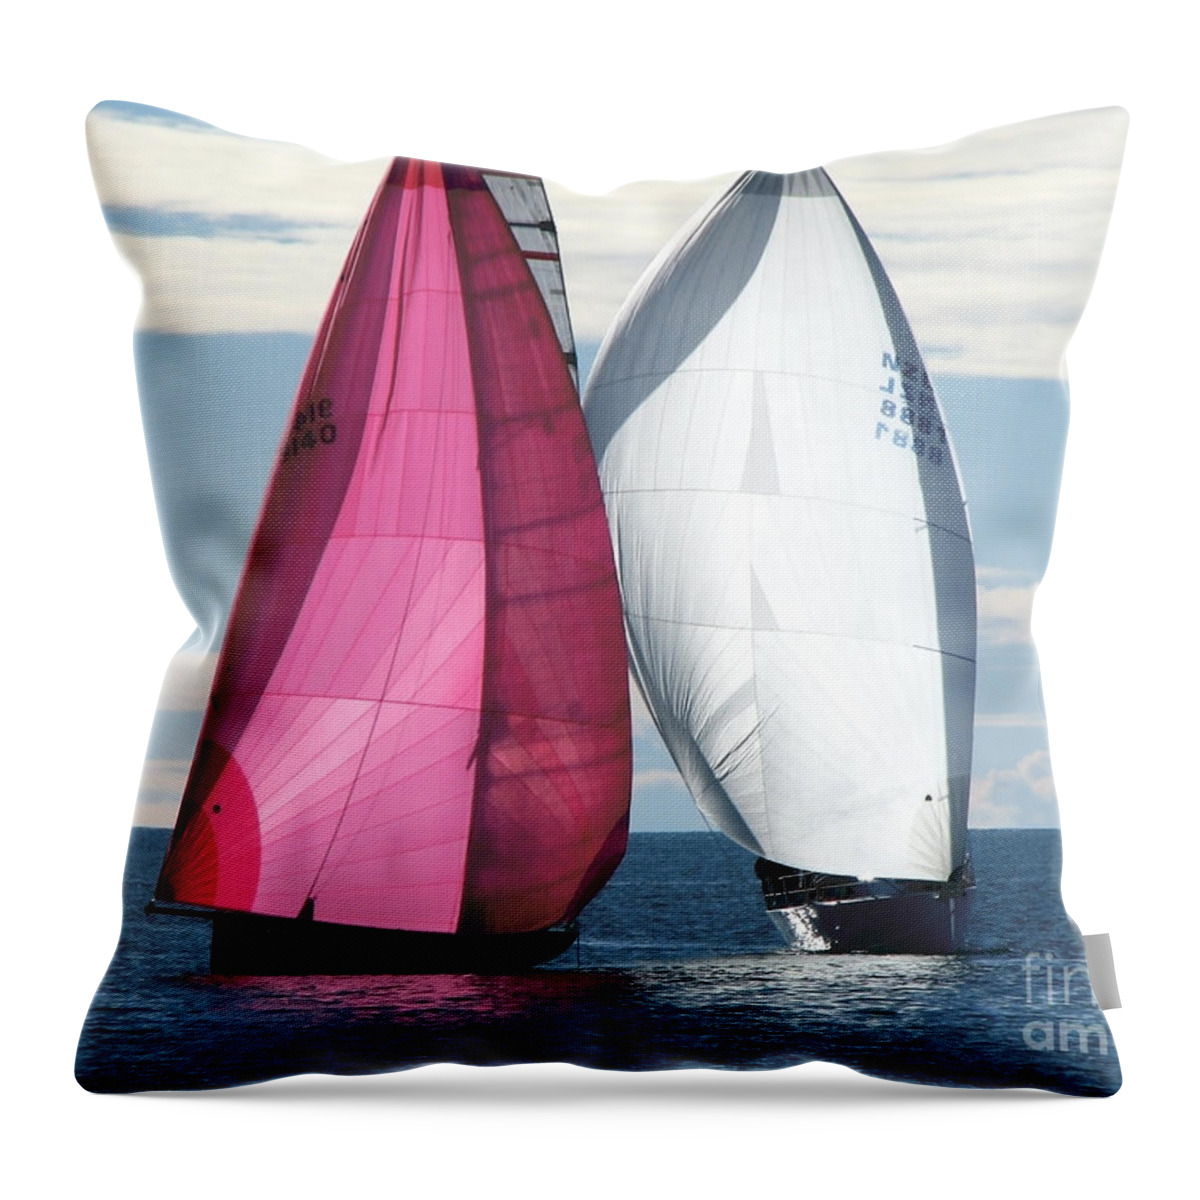 Ocean Throw Pillow featuring the photograph Two Of Us by Jola Martysz